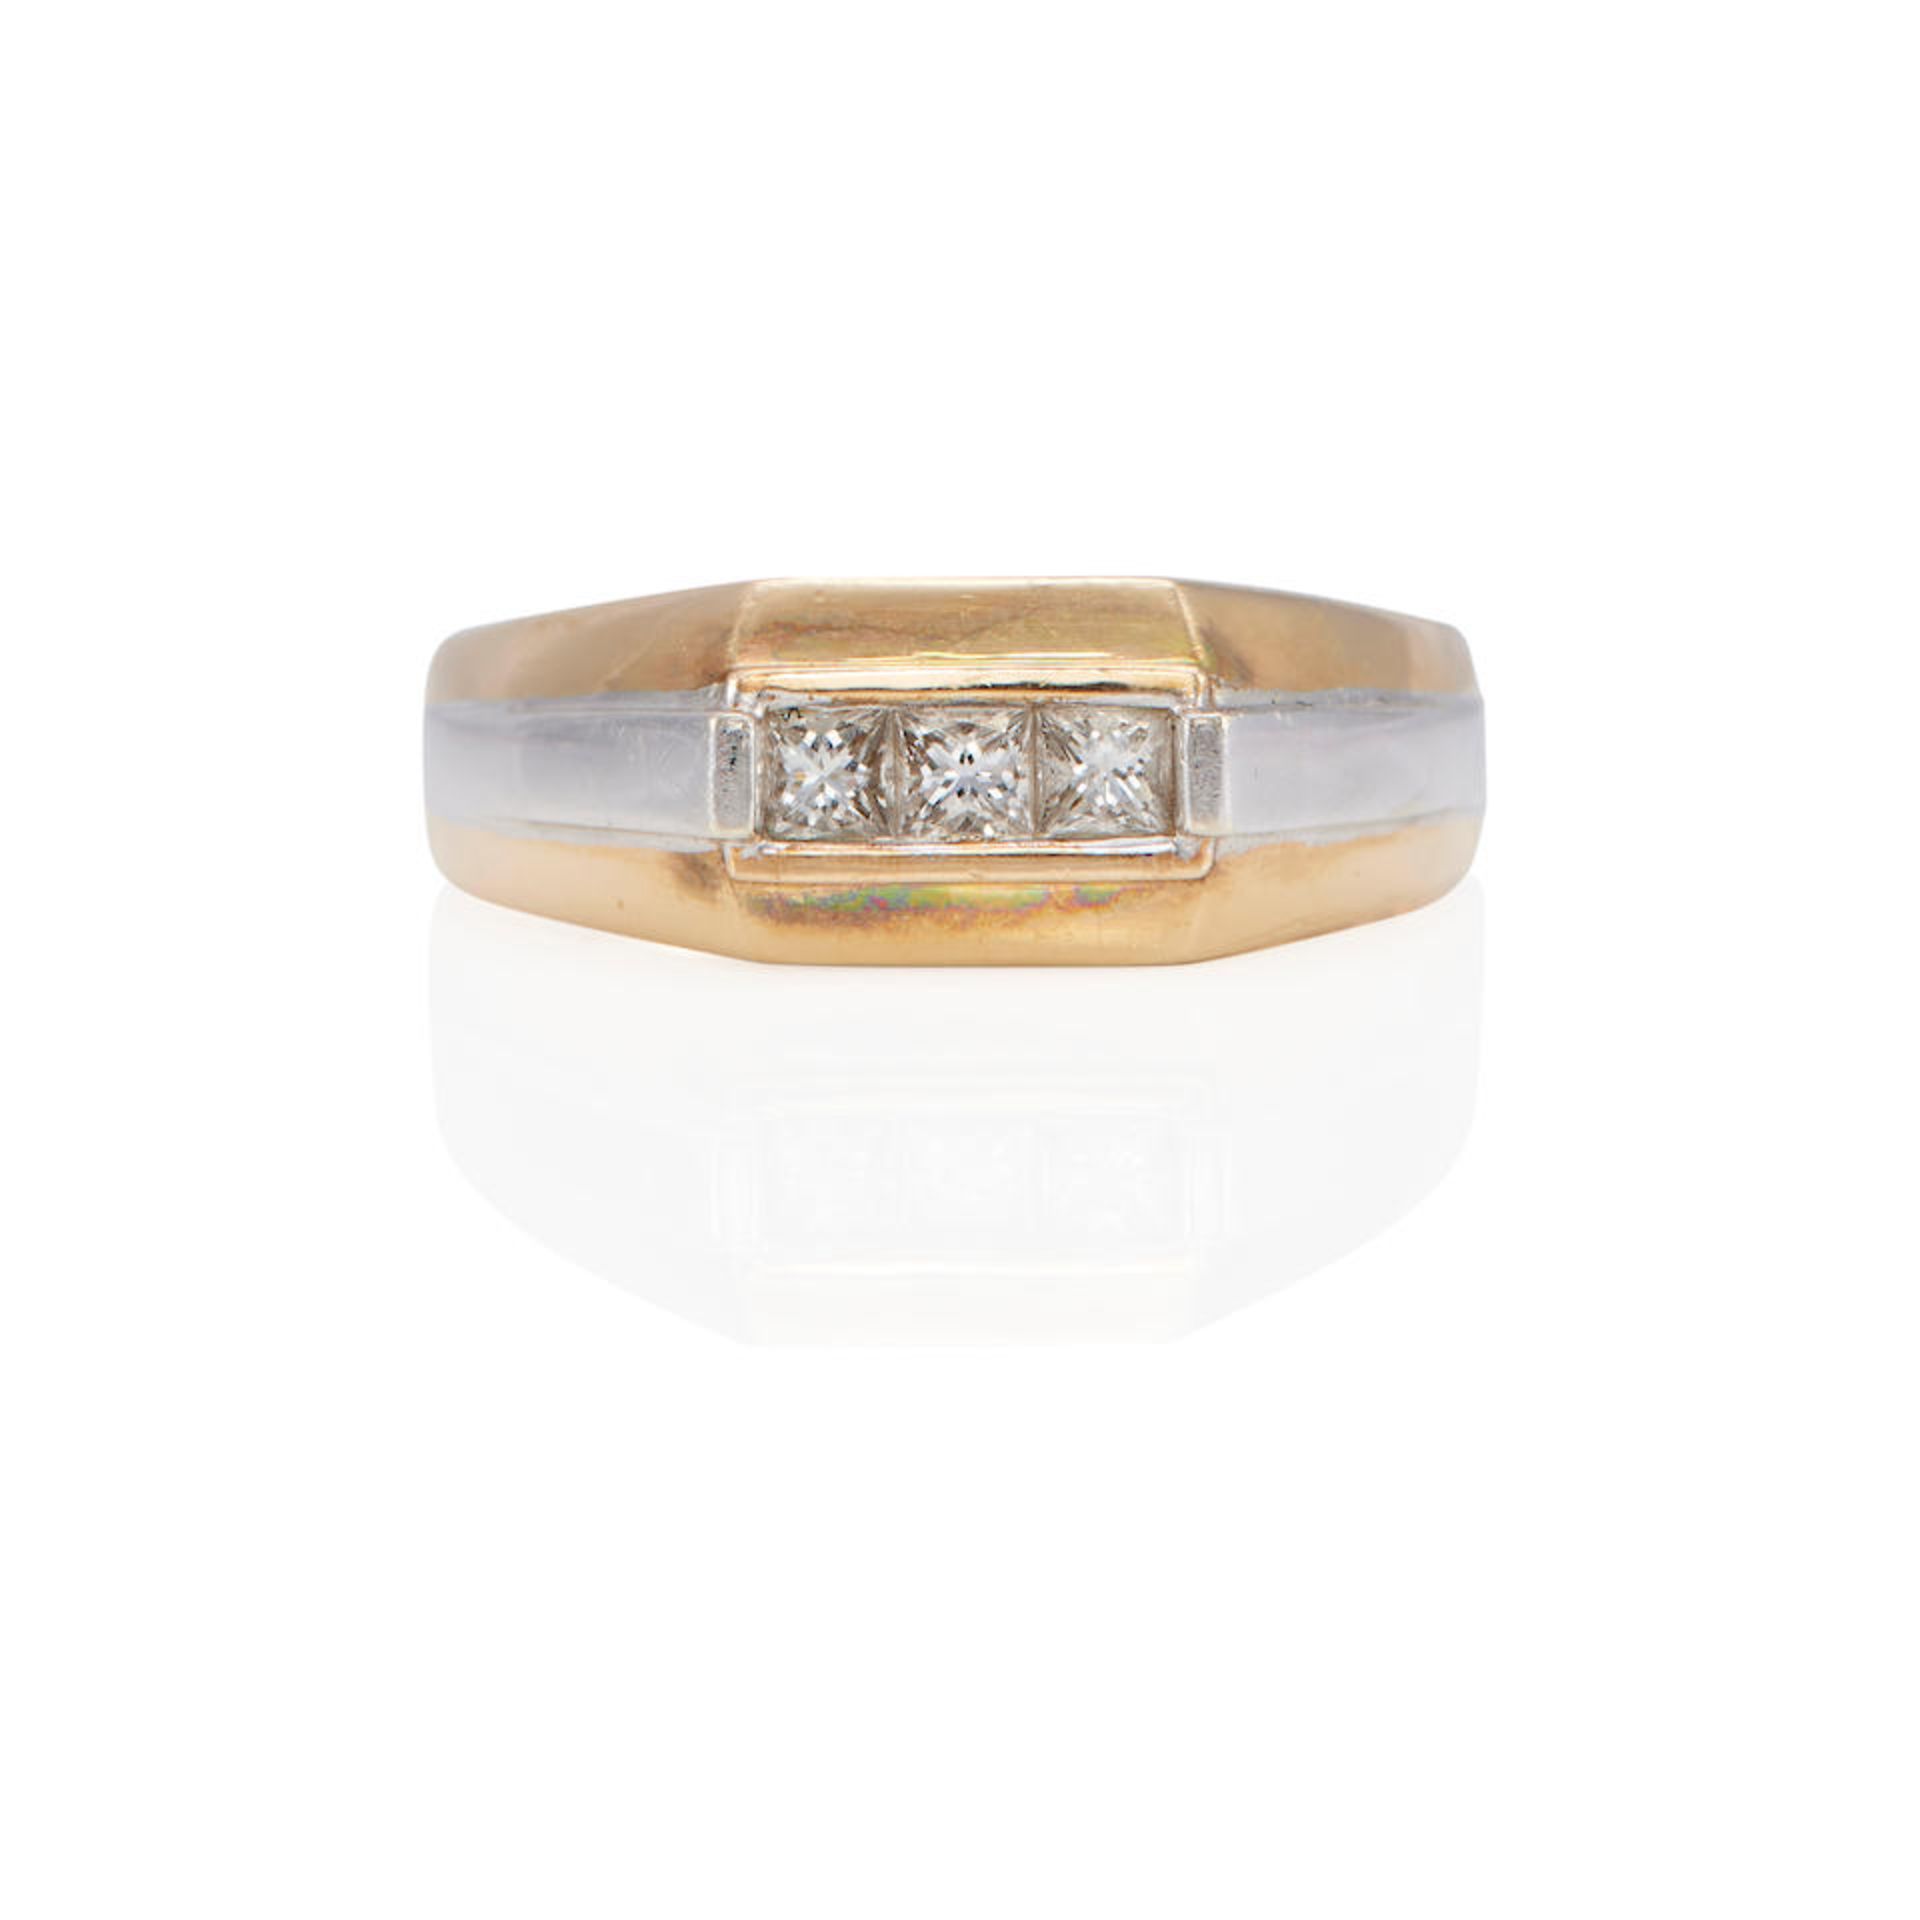 A 14K BI-COLOR GOLD AND DIAMOND RING